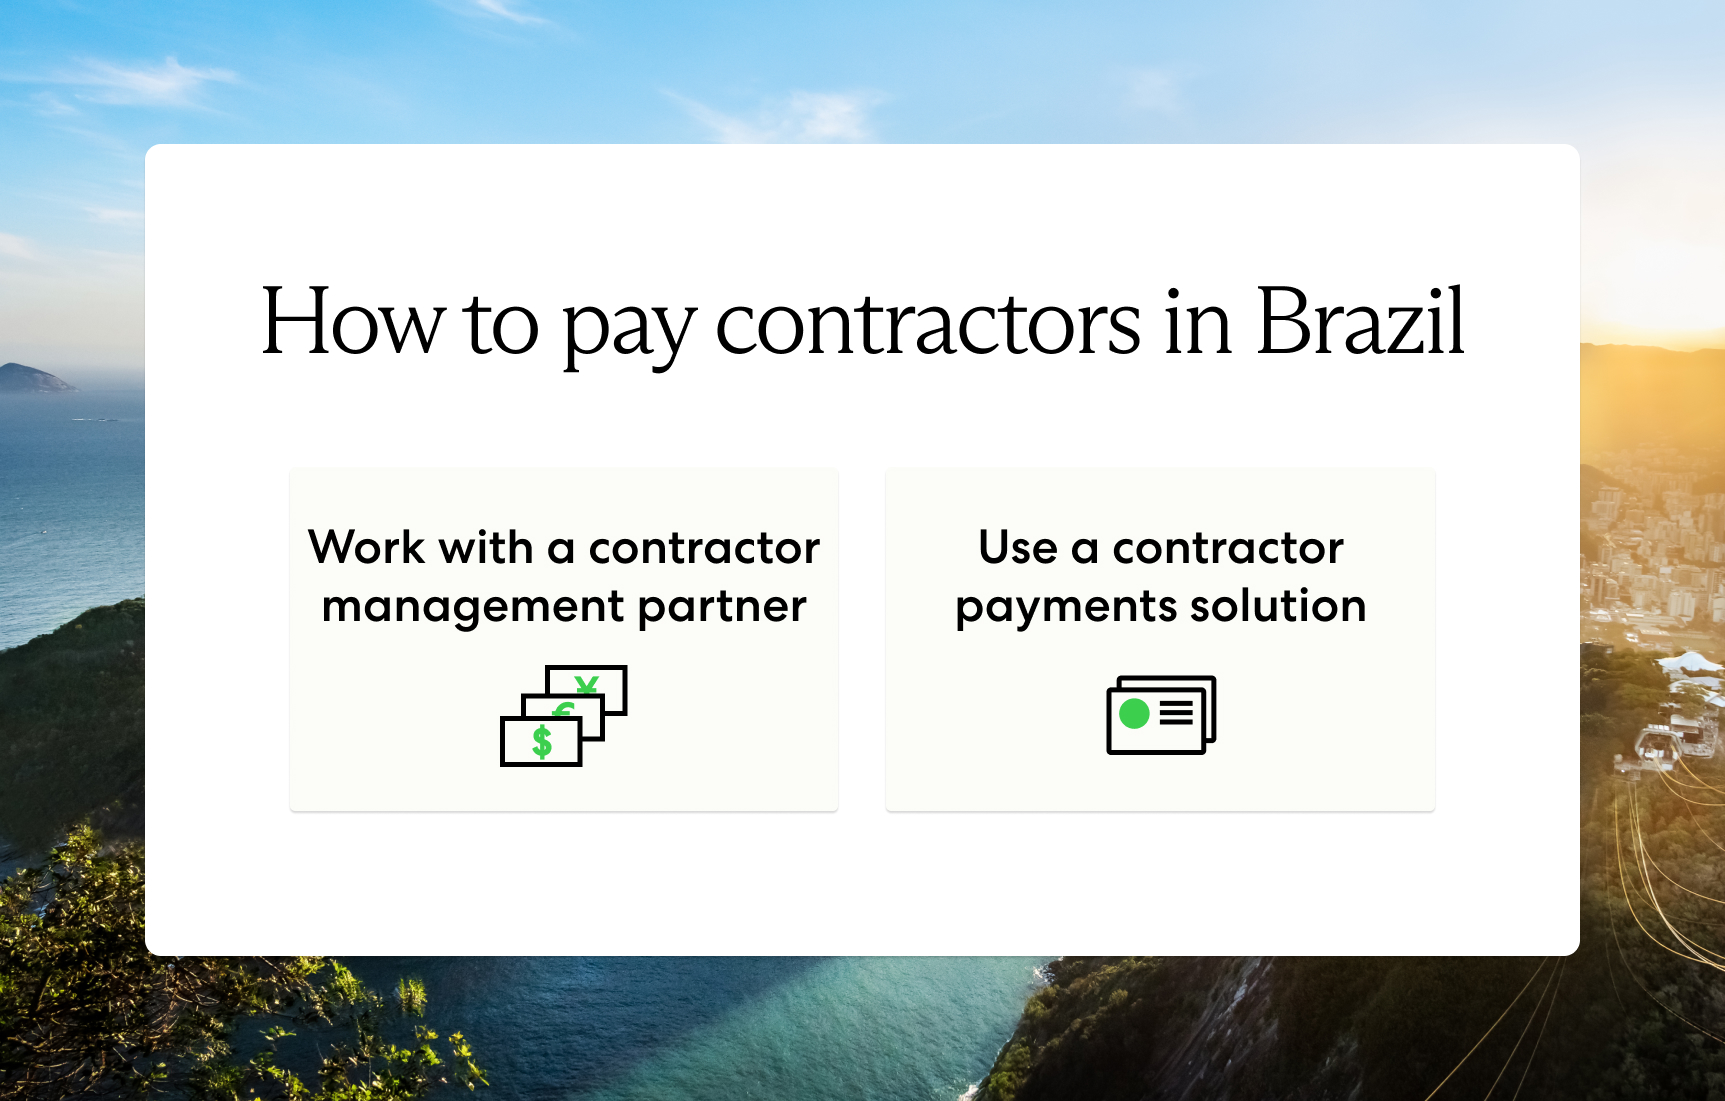 How to pay contractors in Brazil graphic